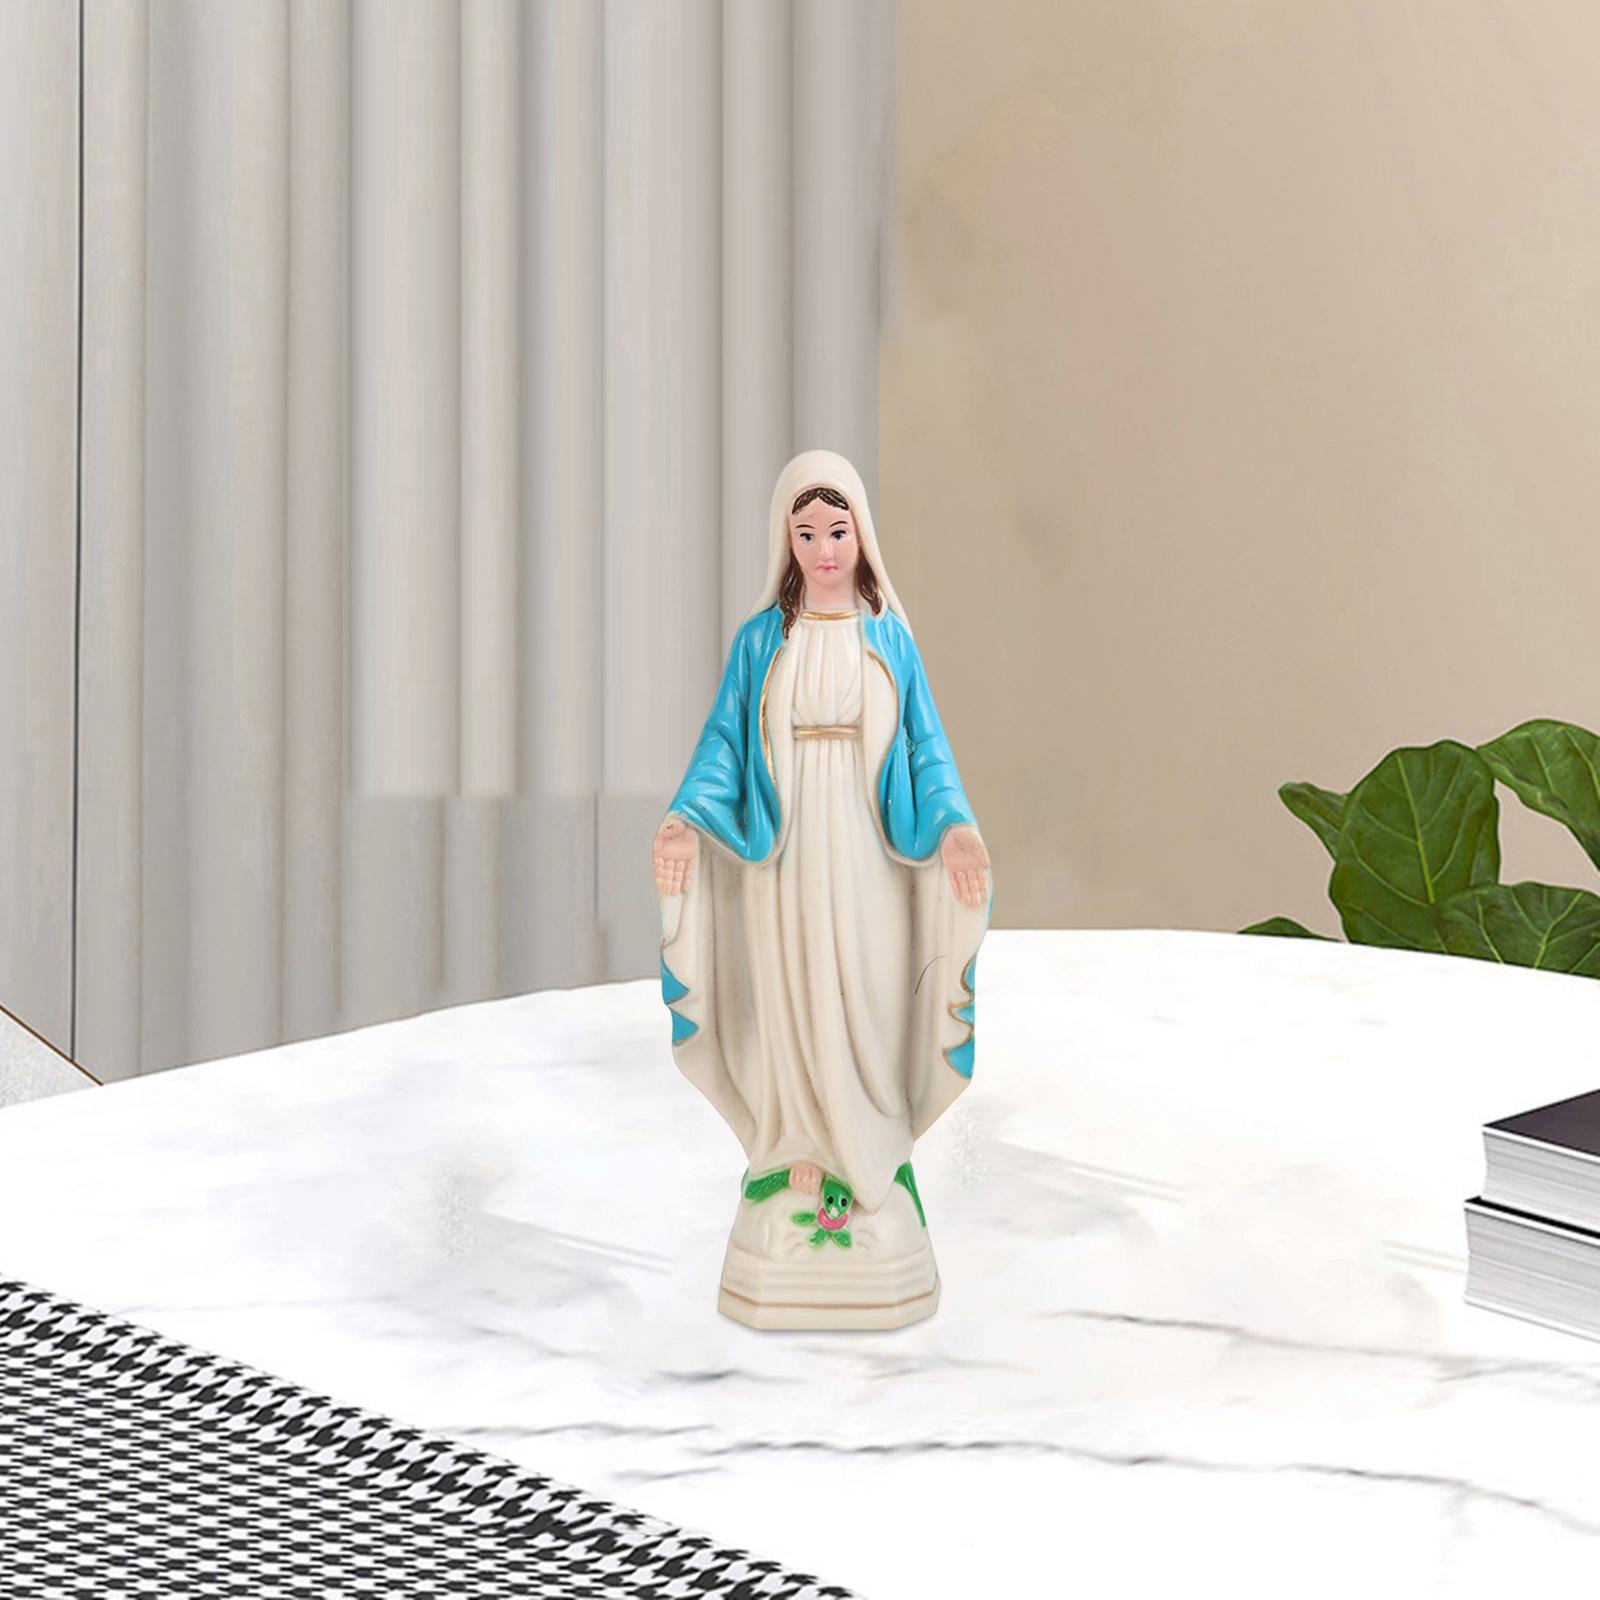 Blessed Virgin Mary Figurine Character Sculpture Statue Decoration 10cm Blue Coat